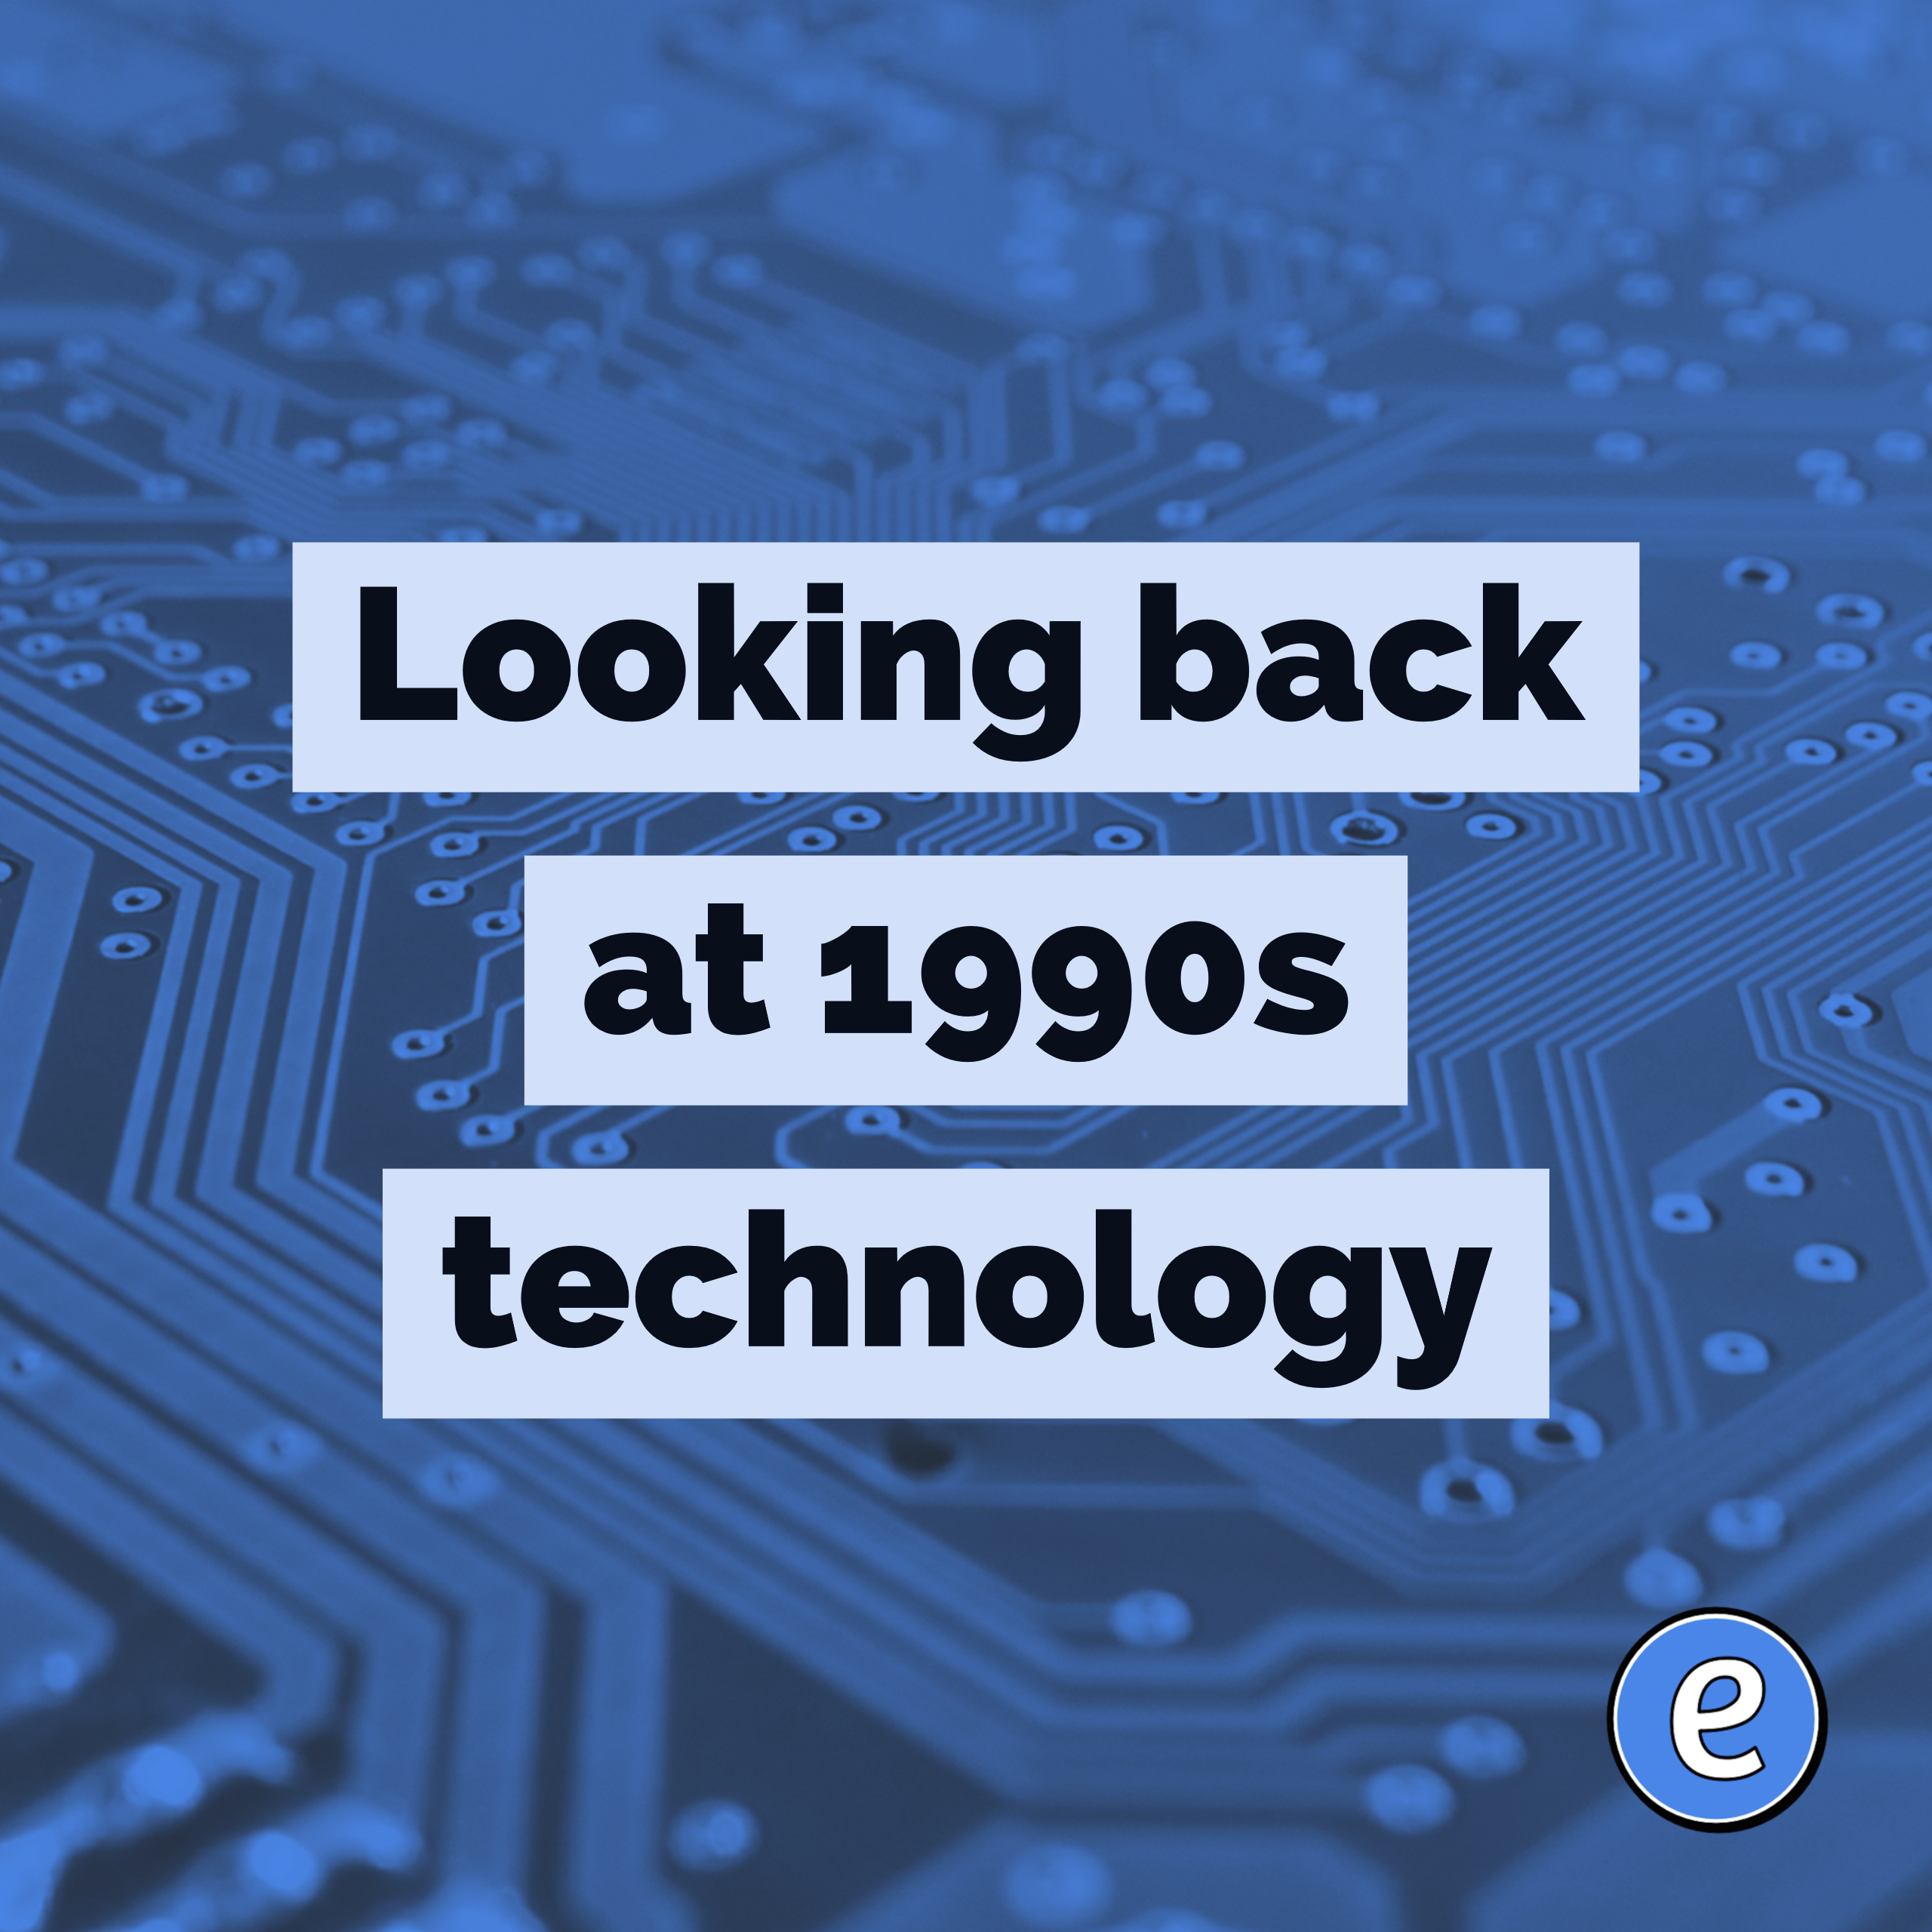 Looking back at 1990s technology